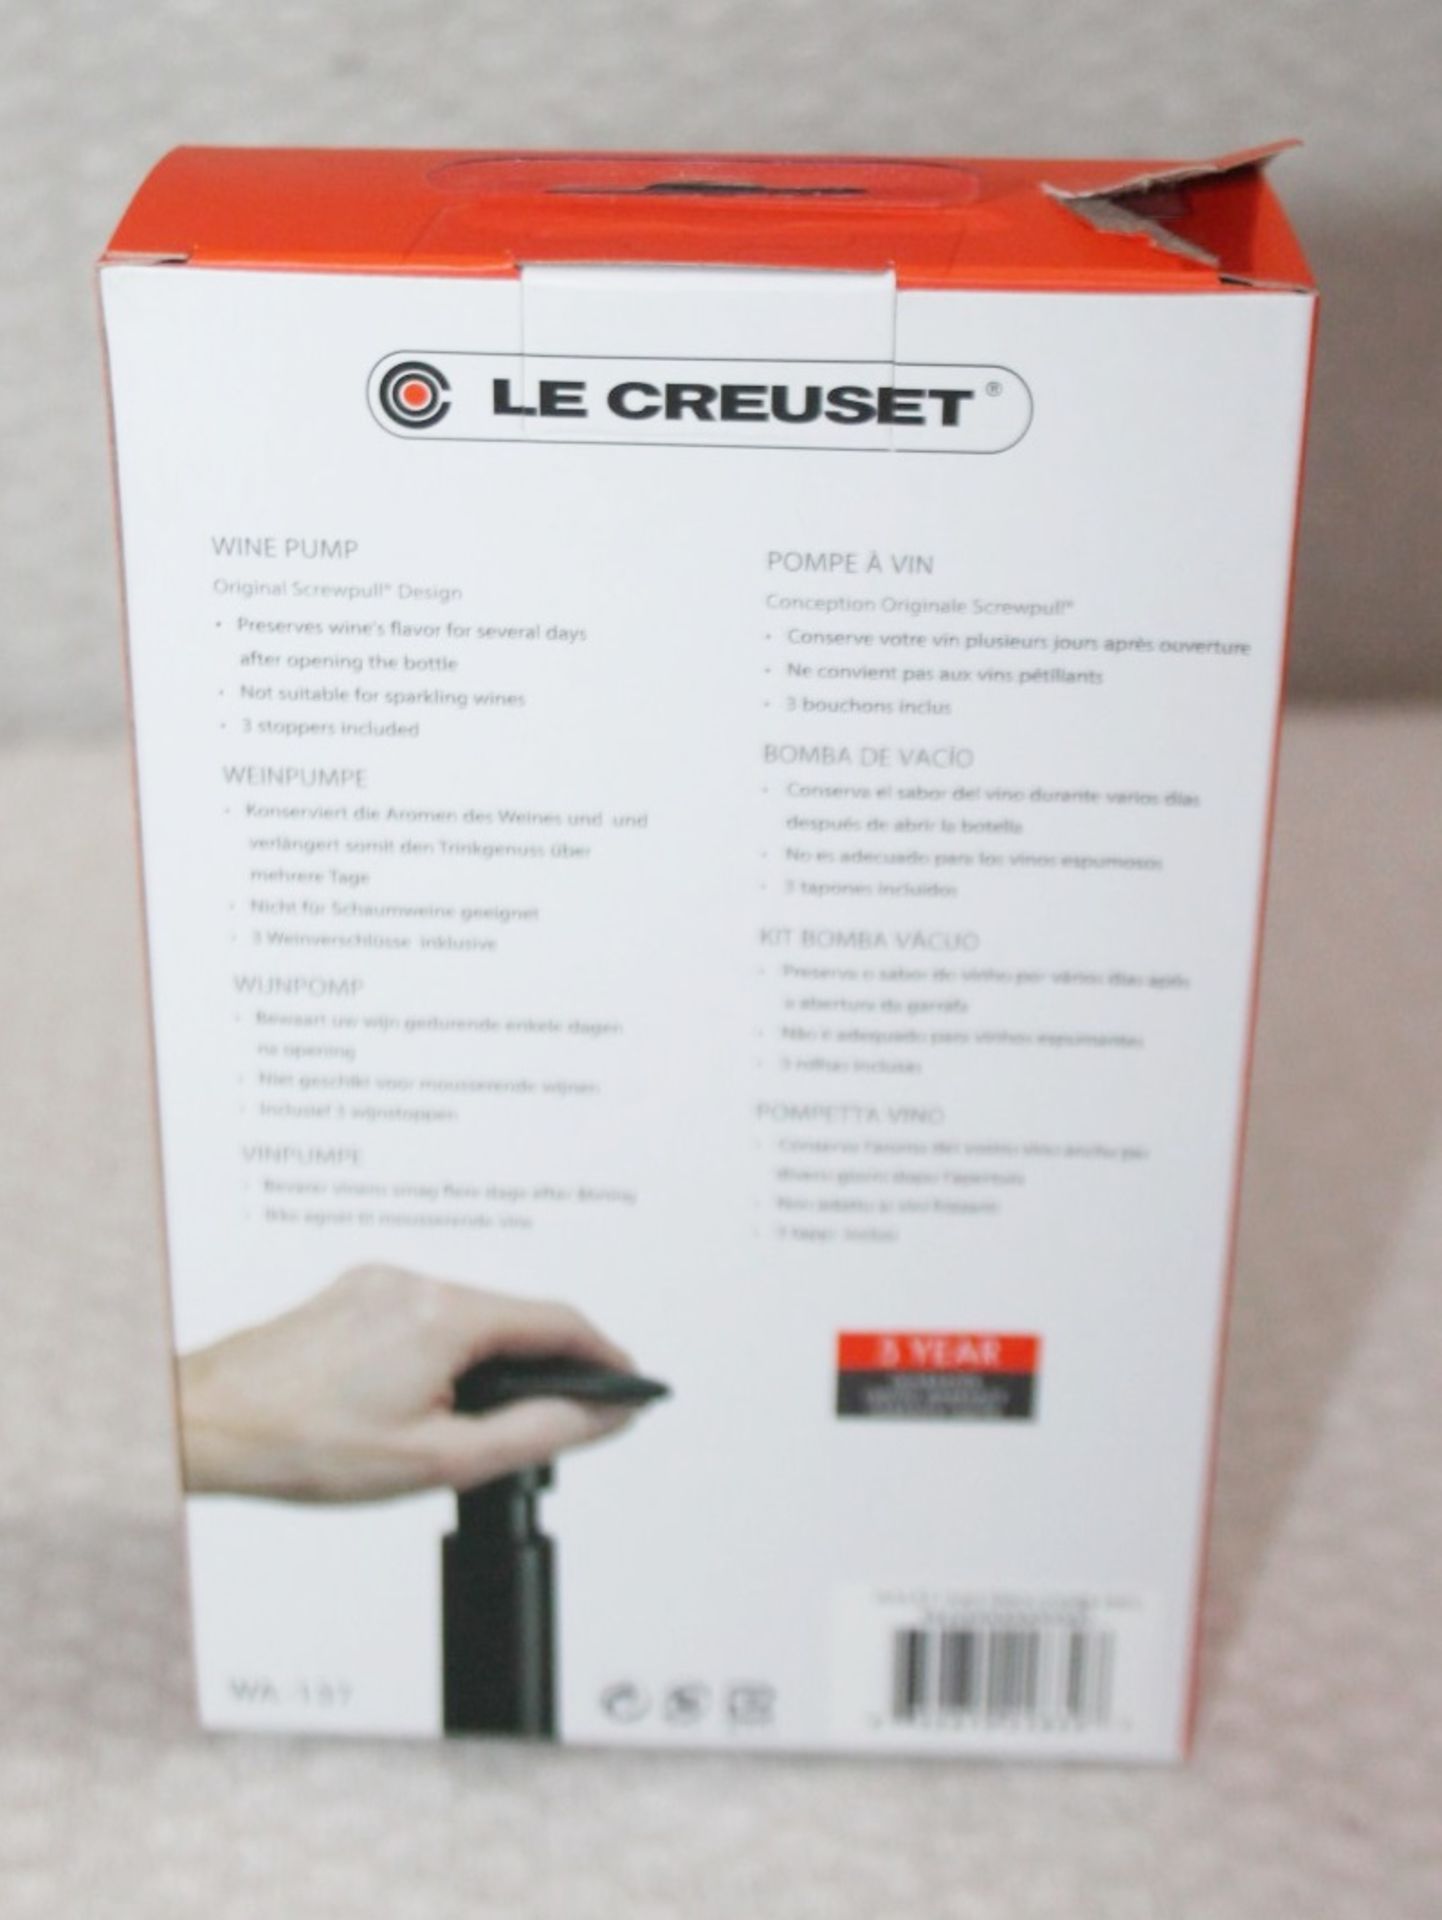 1 x LE CREUSET Wine Pump and Stoppers (WA-137) - Unused Boxed Stock - Ref: HAS441/FEB22/WH2/C6 - - Image 5 of 5